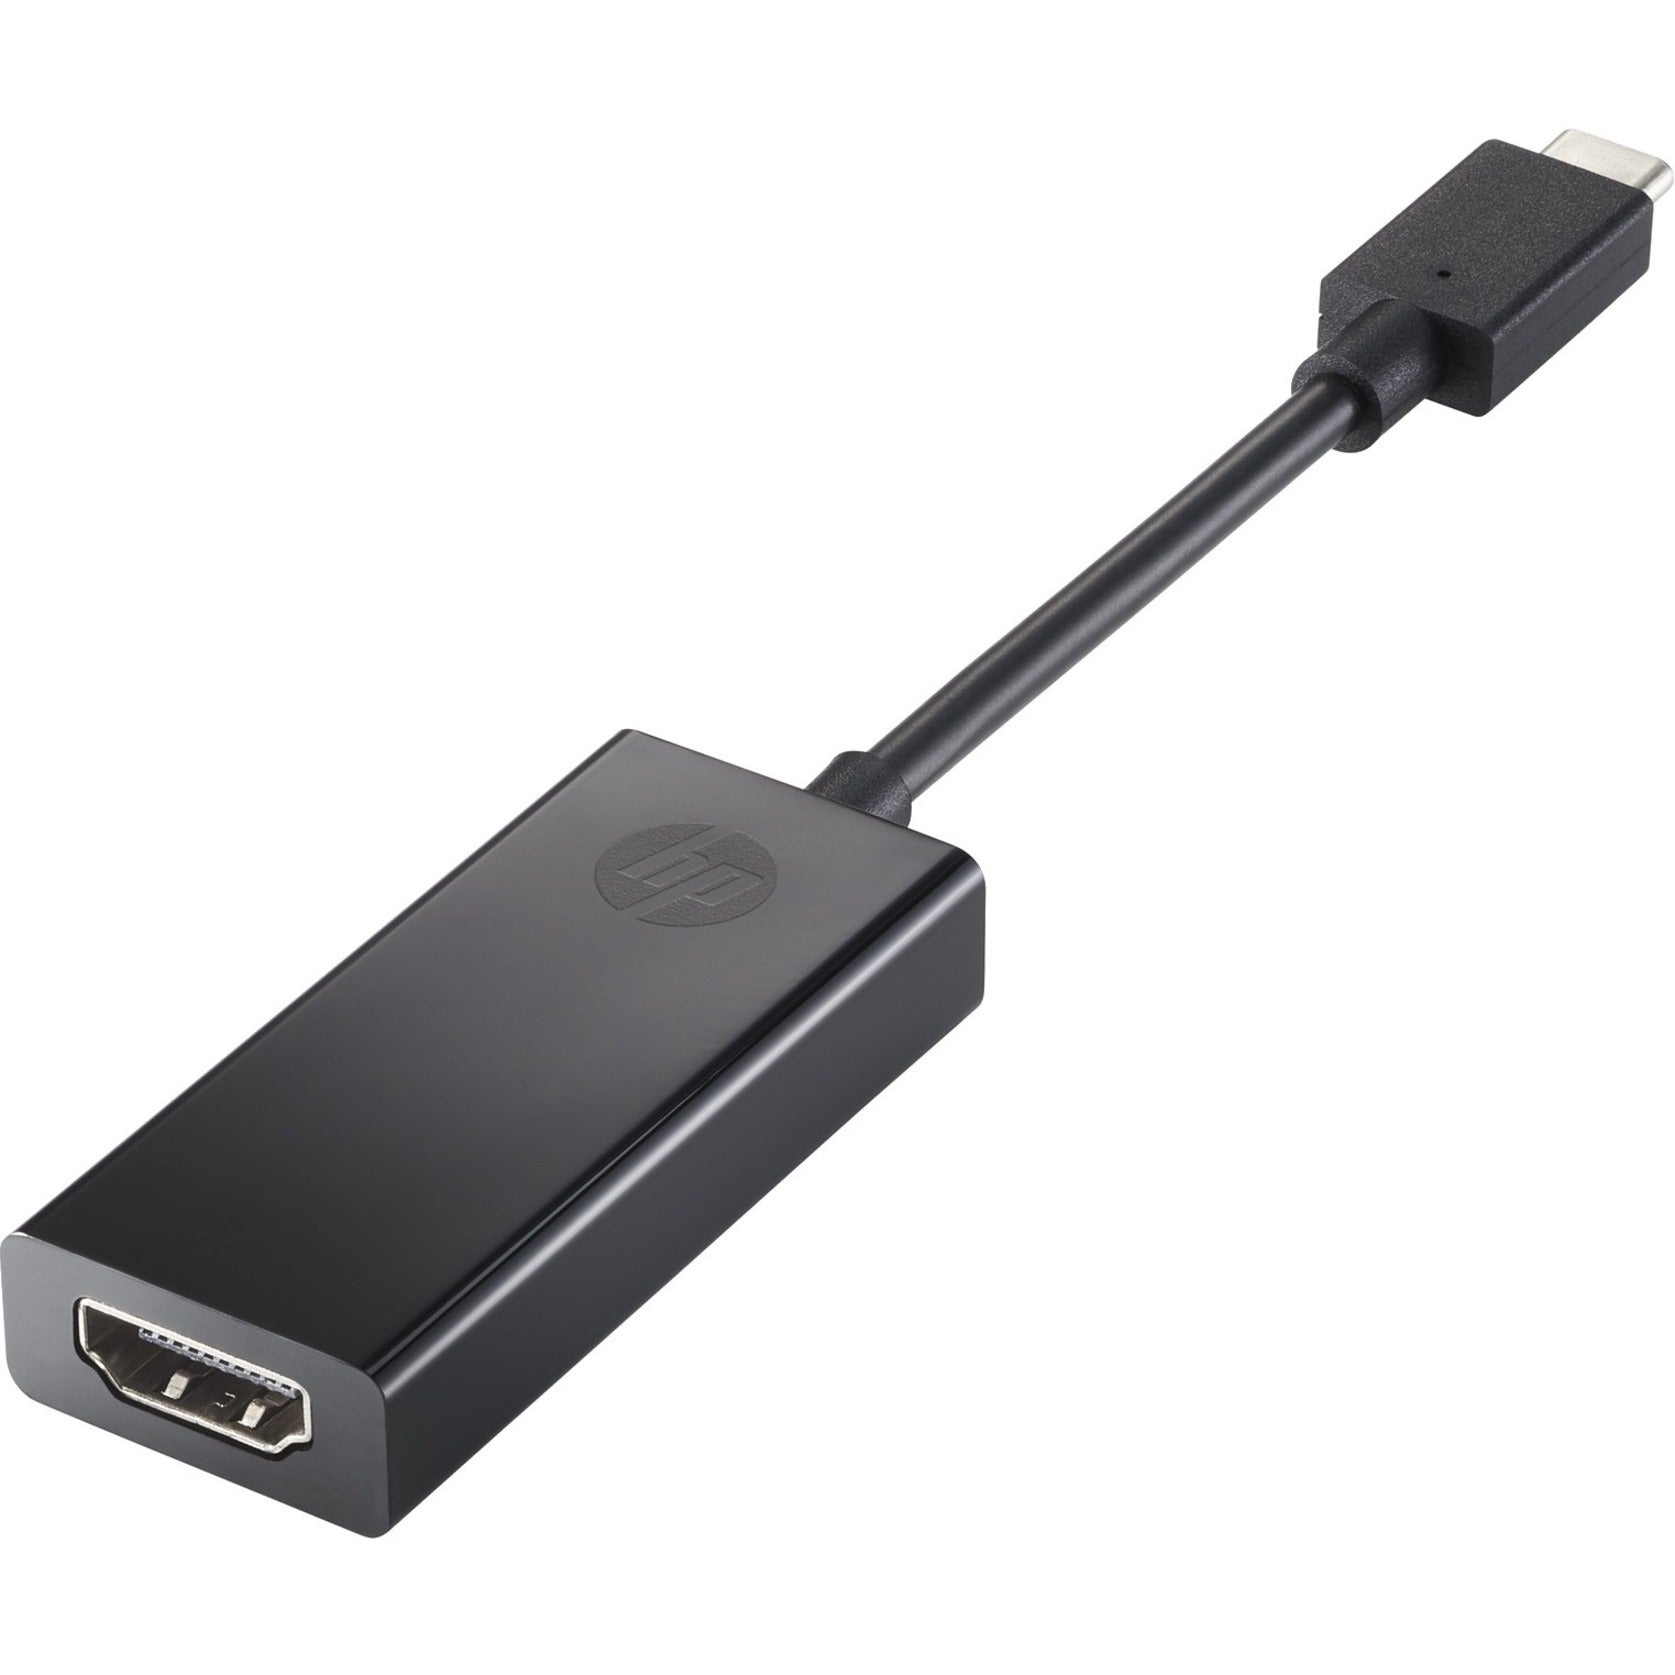 HP 1WC36AA USB-C to HDMI 2.0 Graphic Adapter, Connect Your PC to HDMI Display